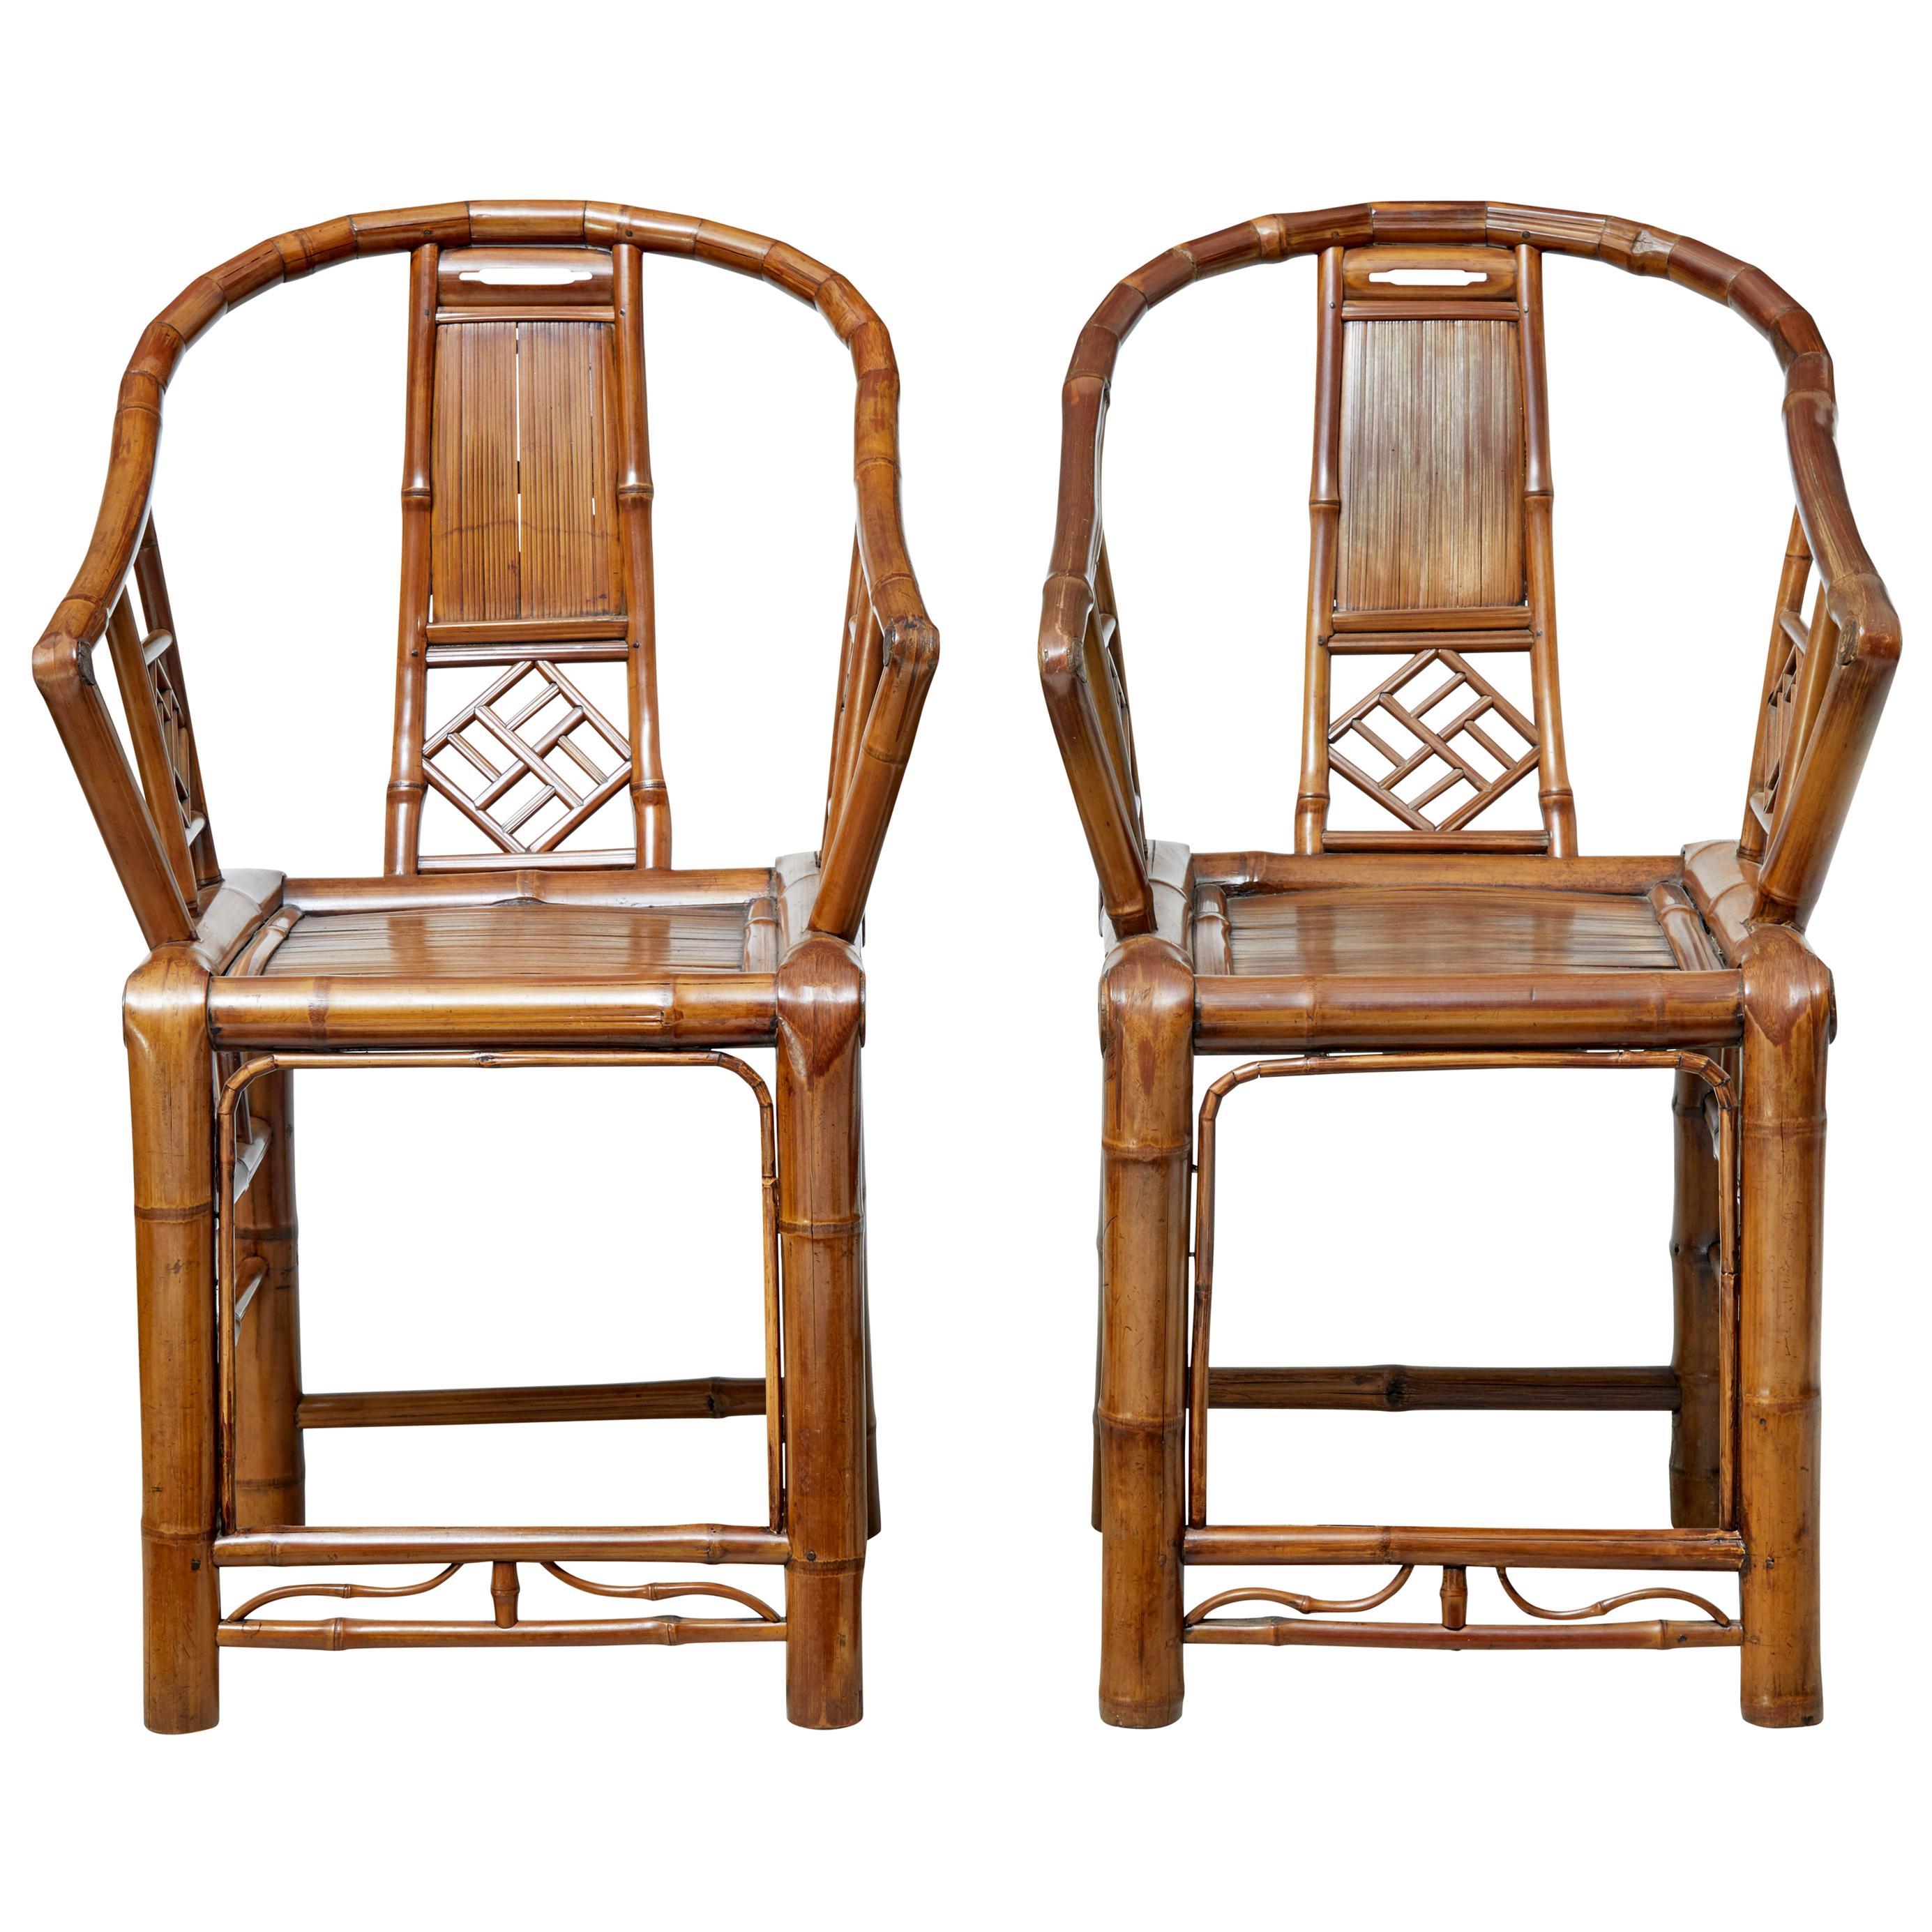 Pair of Early 20th Century Chinese Bamboo Armchairs